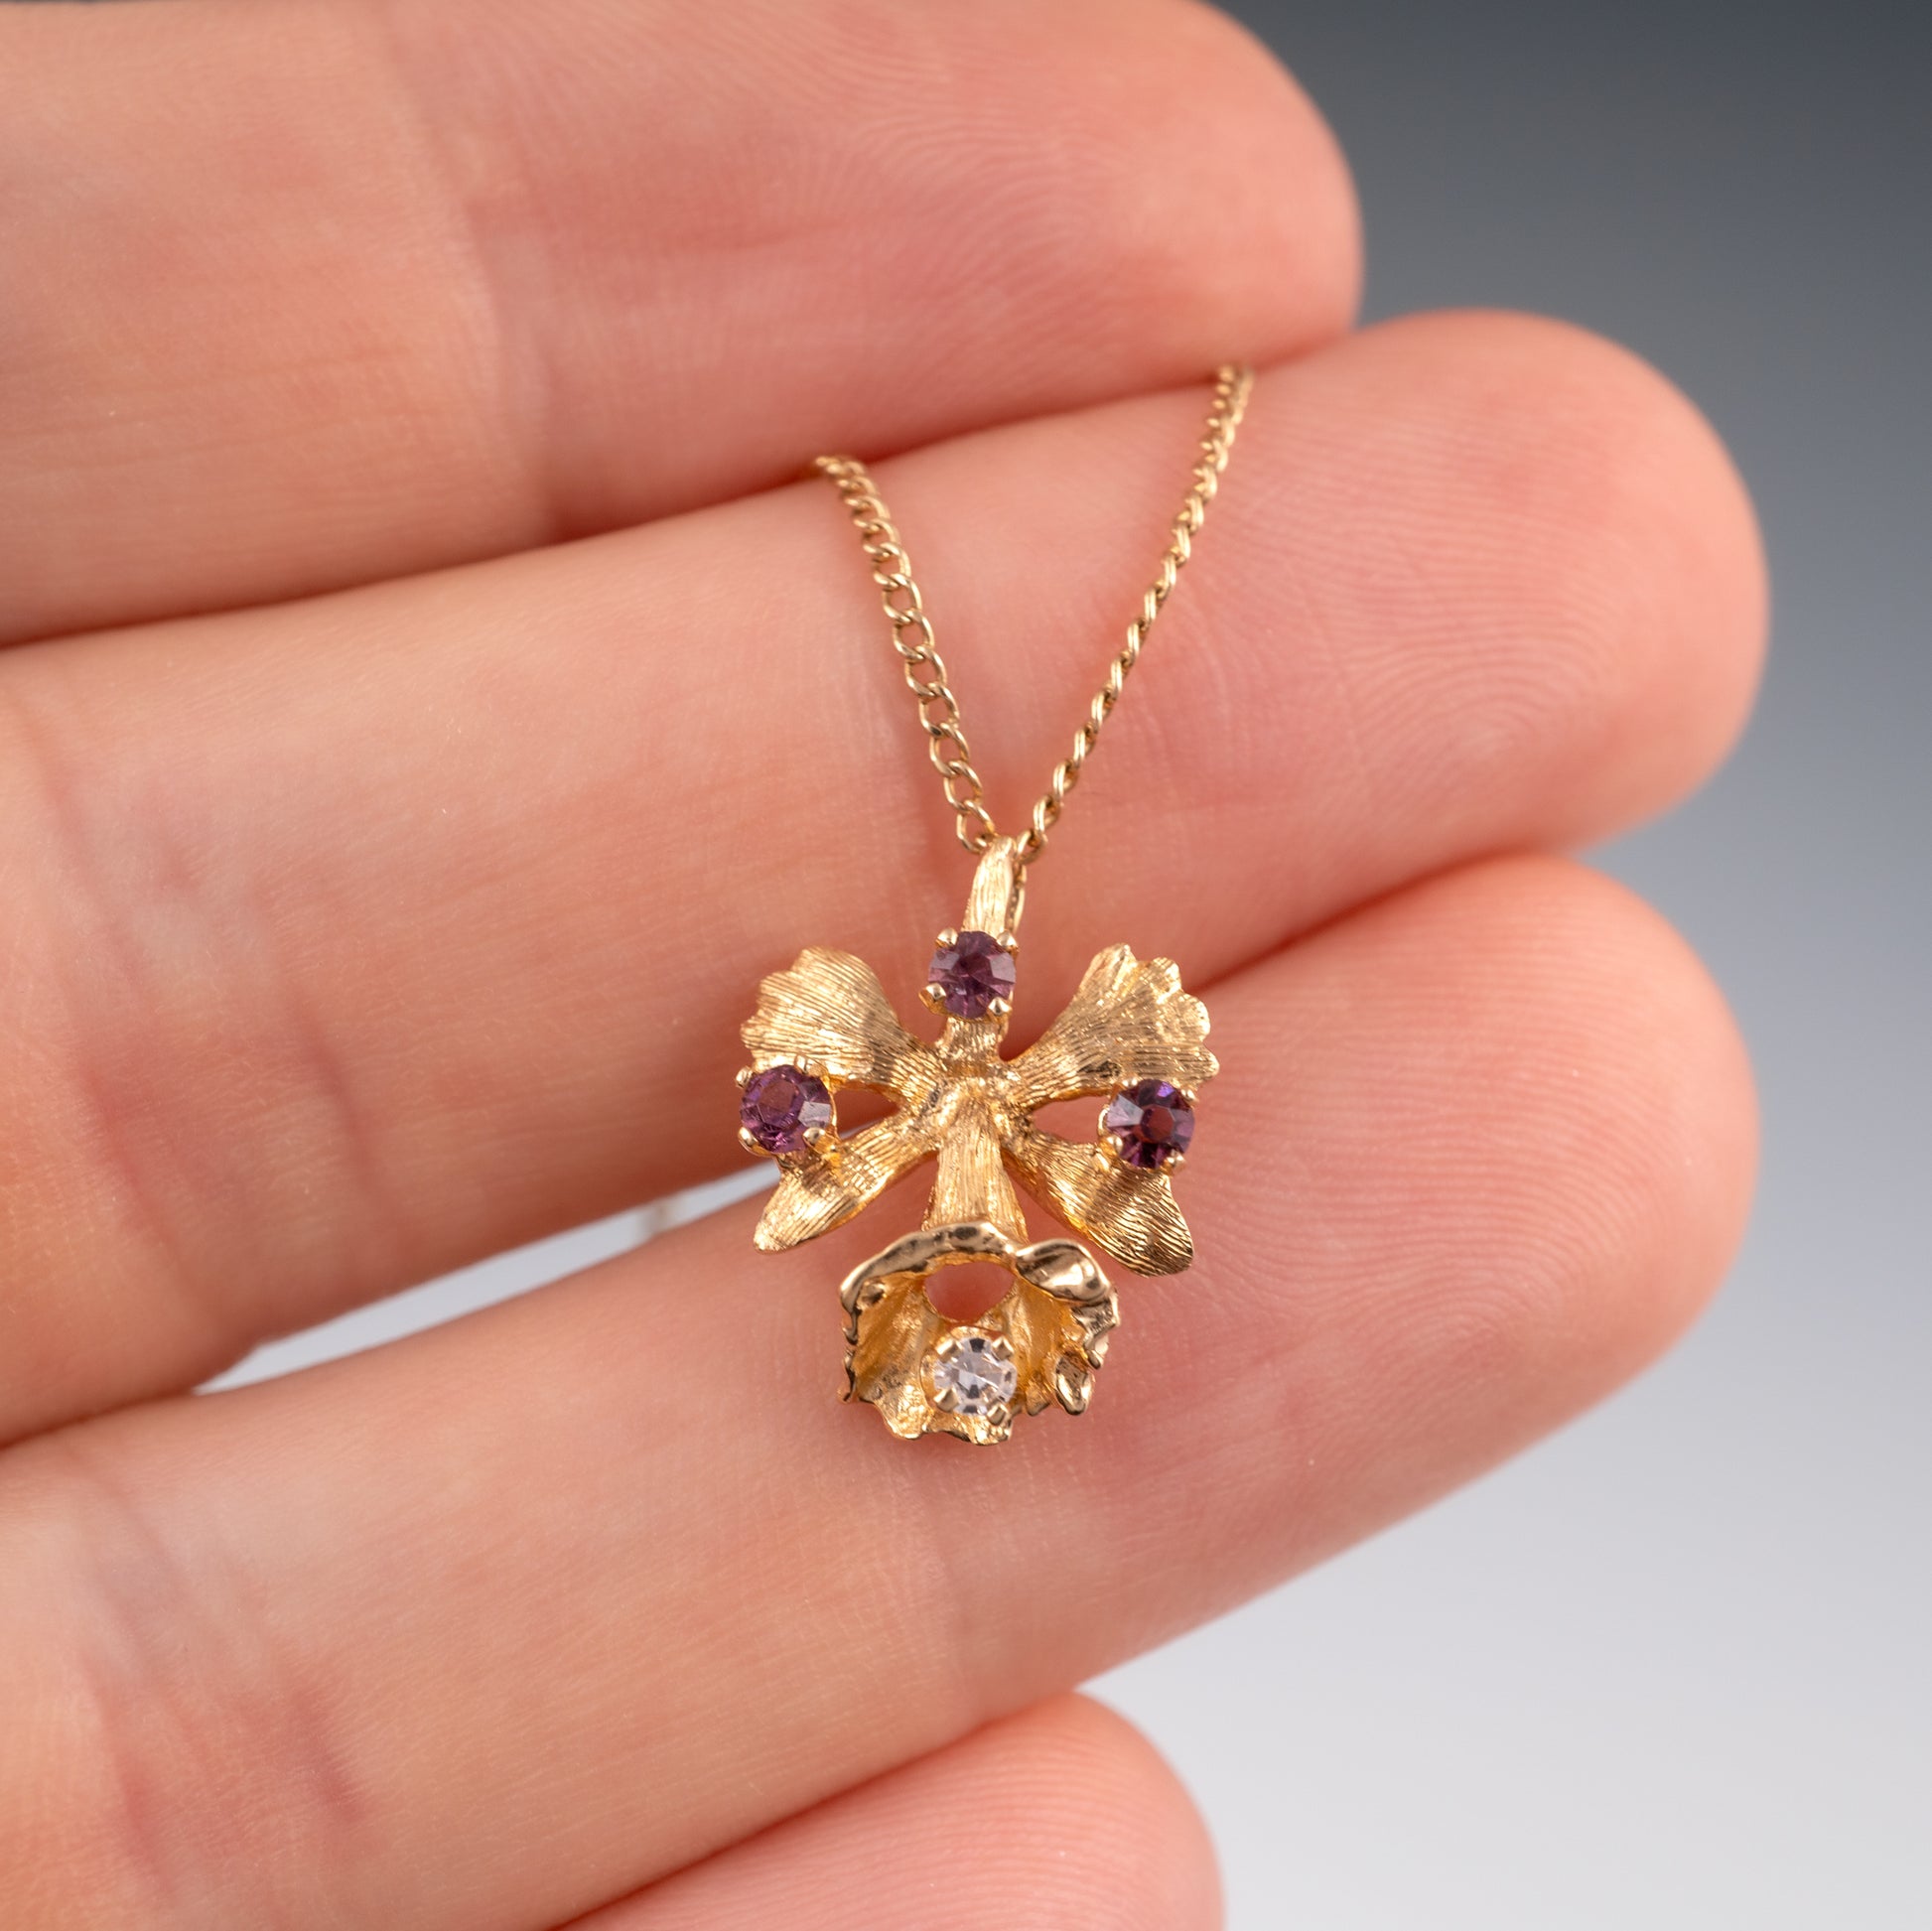 Preloved 14k Gold Diamond Amethyst Flower Necklace With 21 Inch Rope Chain - Hunters Fine Jewellery